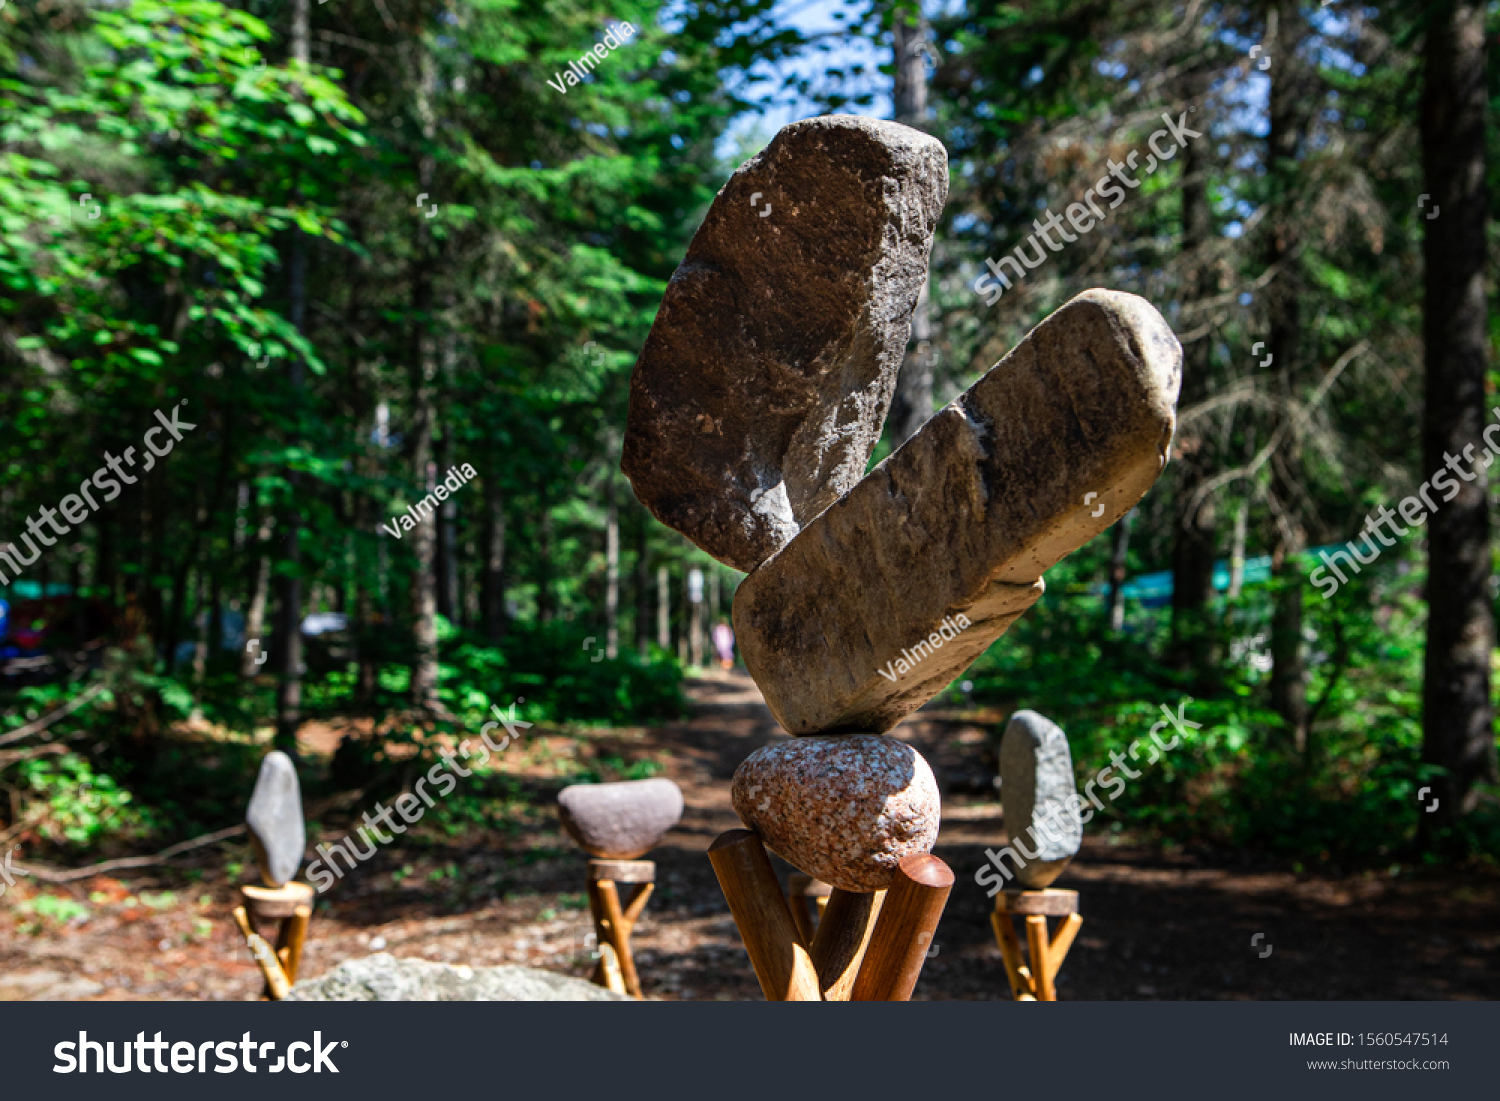 Rock balancing or stone balancing, selective focus of Balanced Stones in the forest #1560547514